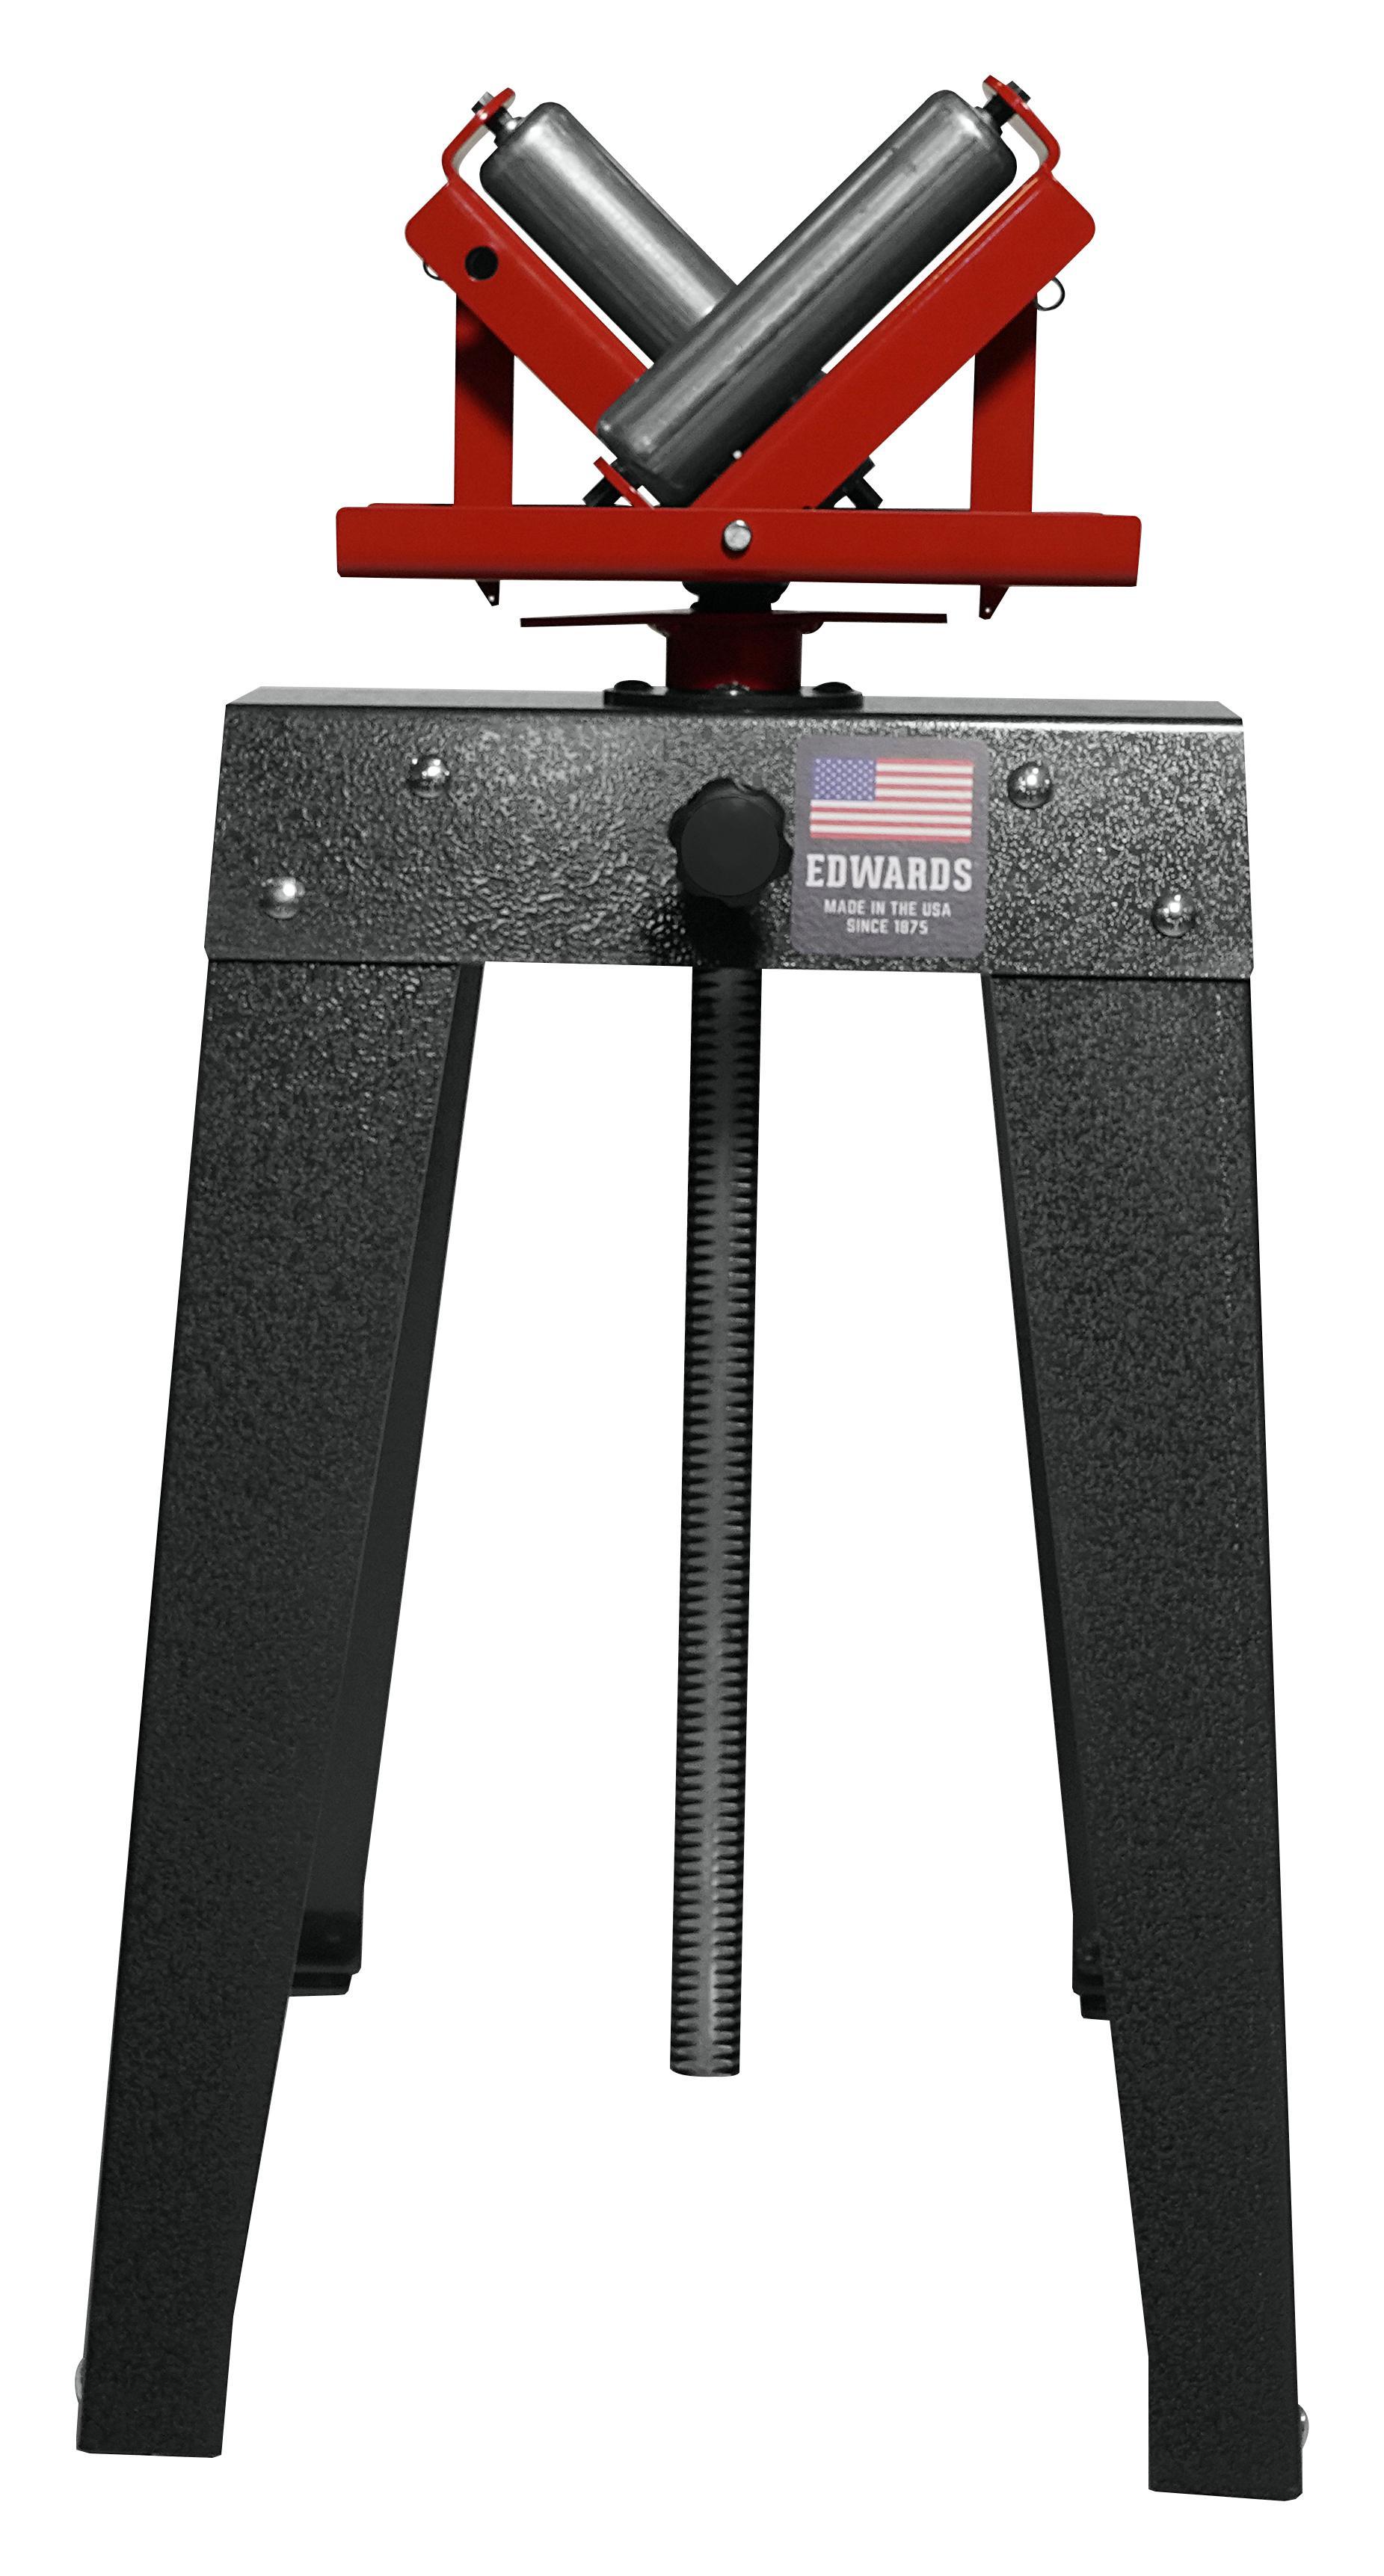 EDWARDS 14 inch COMBINATION HORIZONTAL and V-MATERIAL SUPPORT STAND